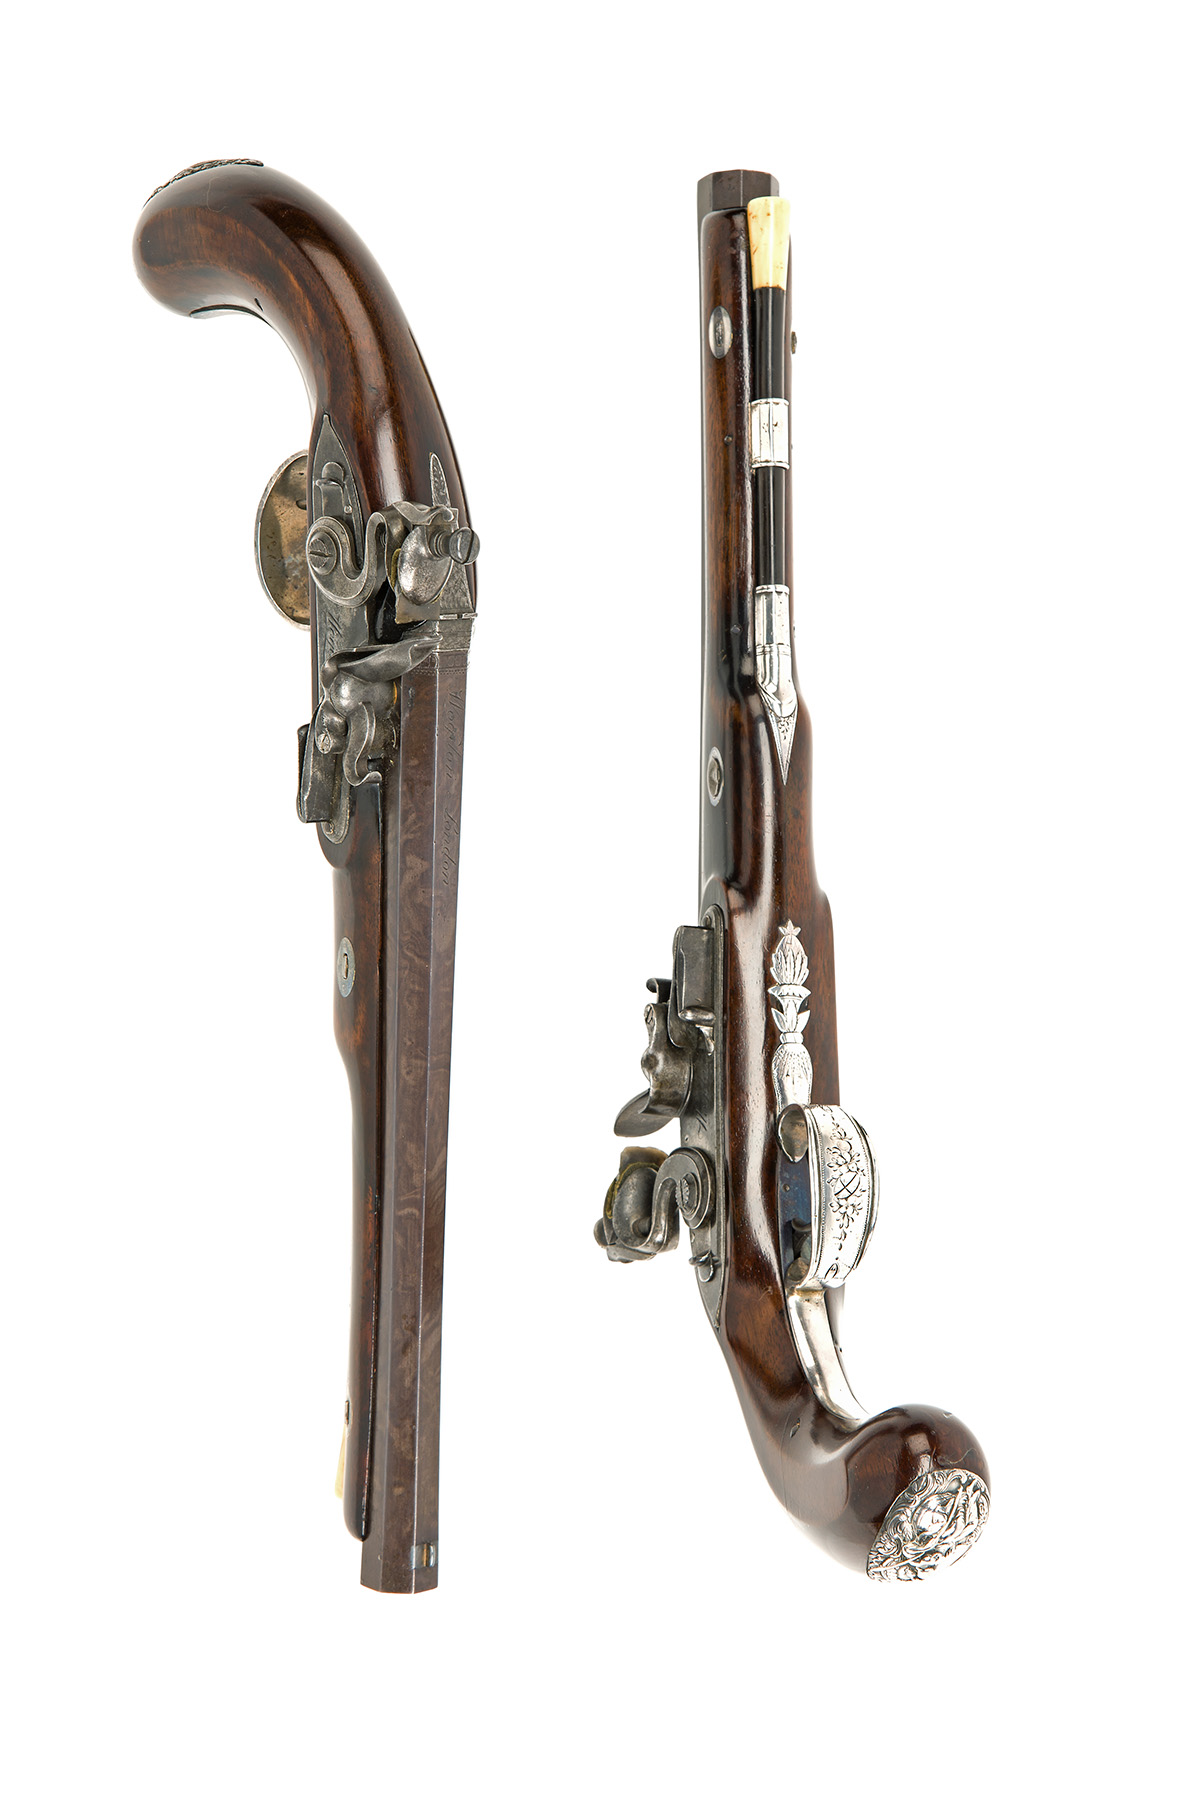 WOGDON, LONDON A PAIR OF 28-BORE FLINTLOCK SILVER-MOUNTED DUELLING PISTOLS, no visible serial - Image 3 of 4